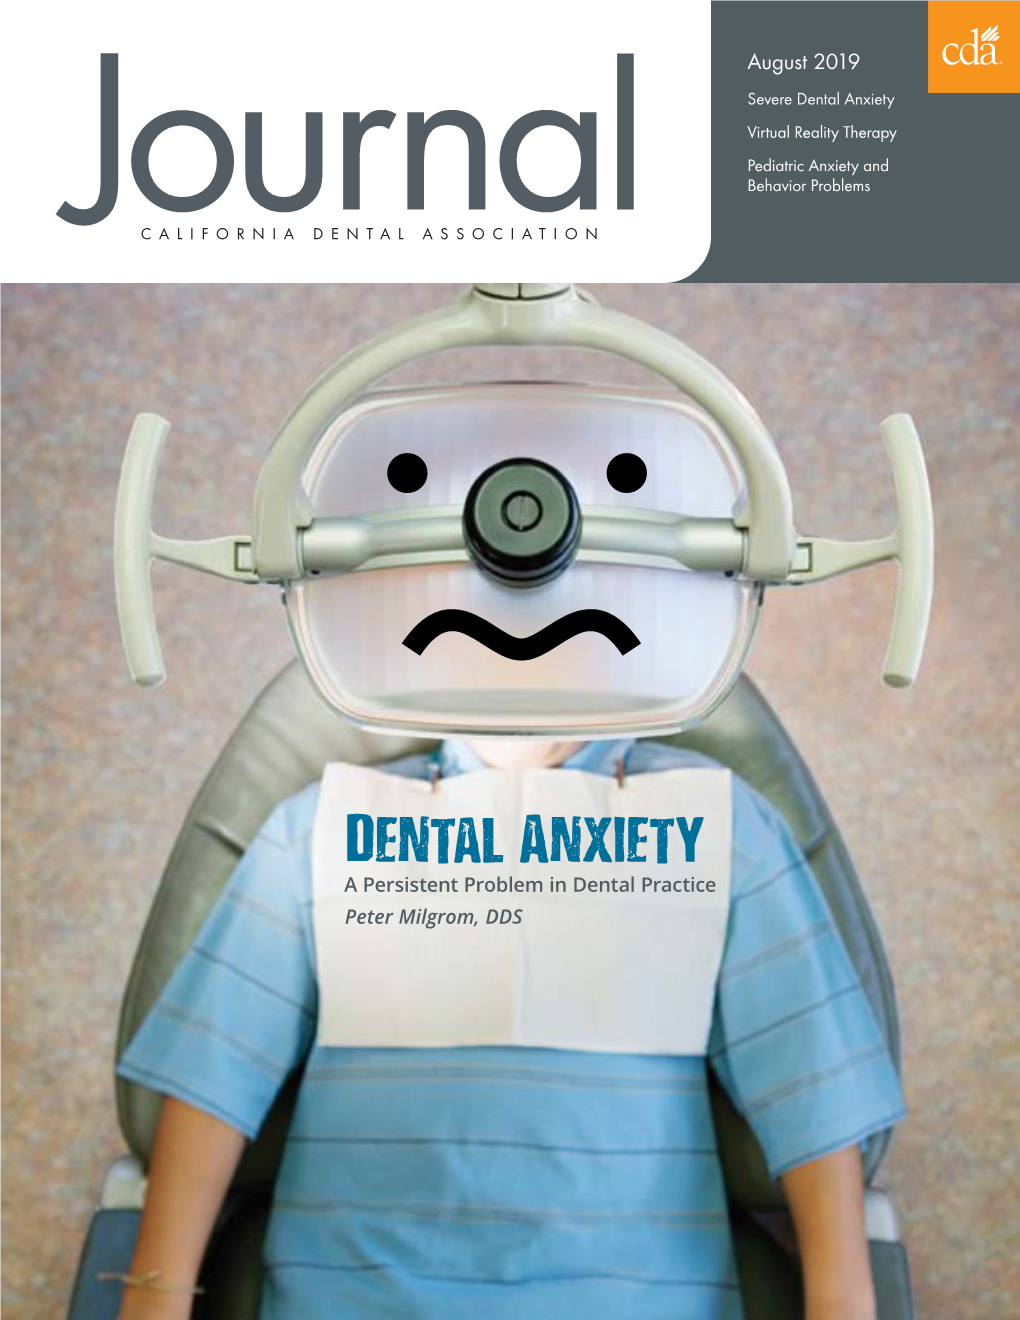 August 2019 Severe Dental Anxiety Virtual Reality Therapy Pediatric Anxiety and Behavior Problems Journacalifornia DENTAL ASSOCIATION